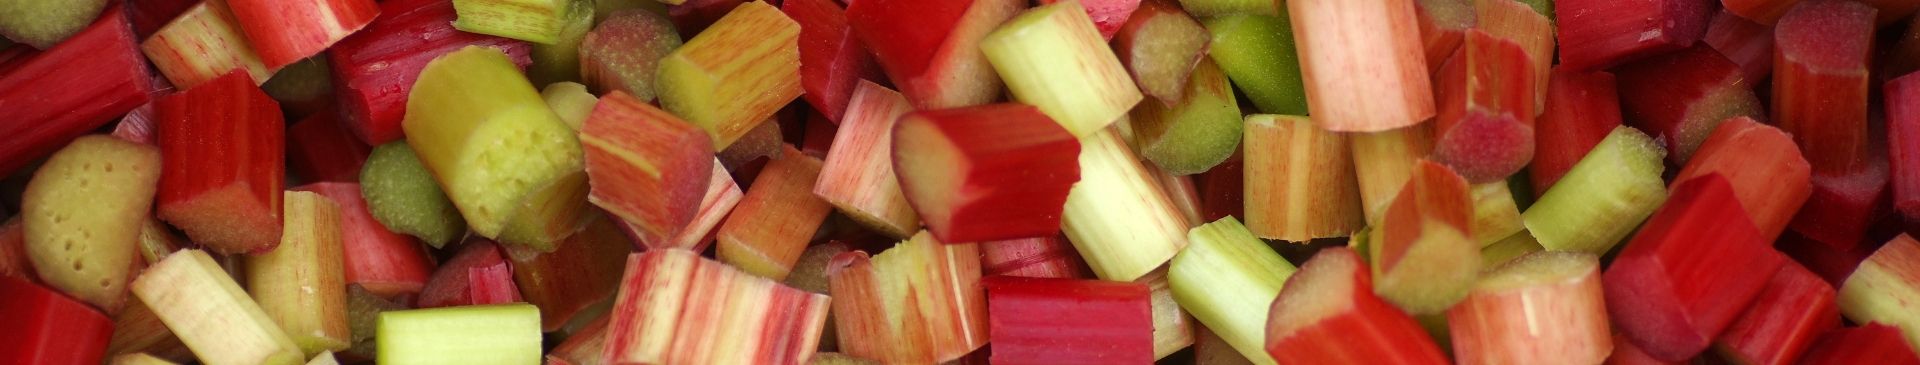 How to Grow Rhubarb from Seed